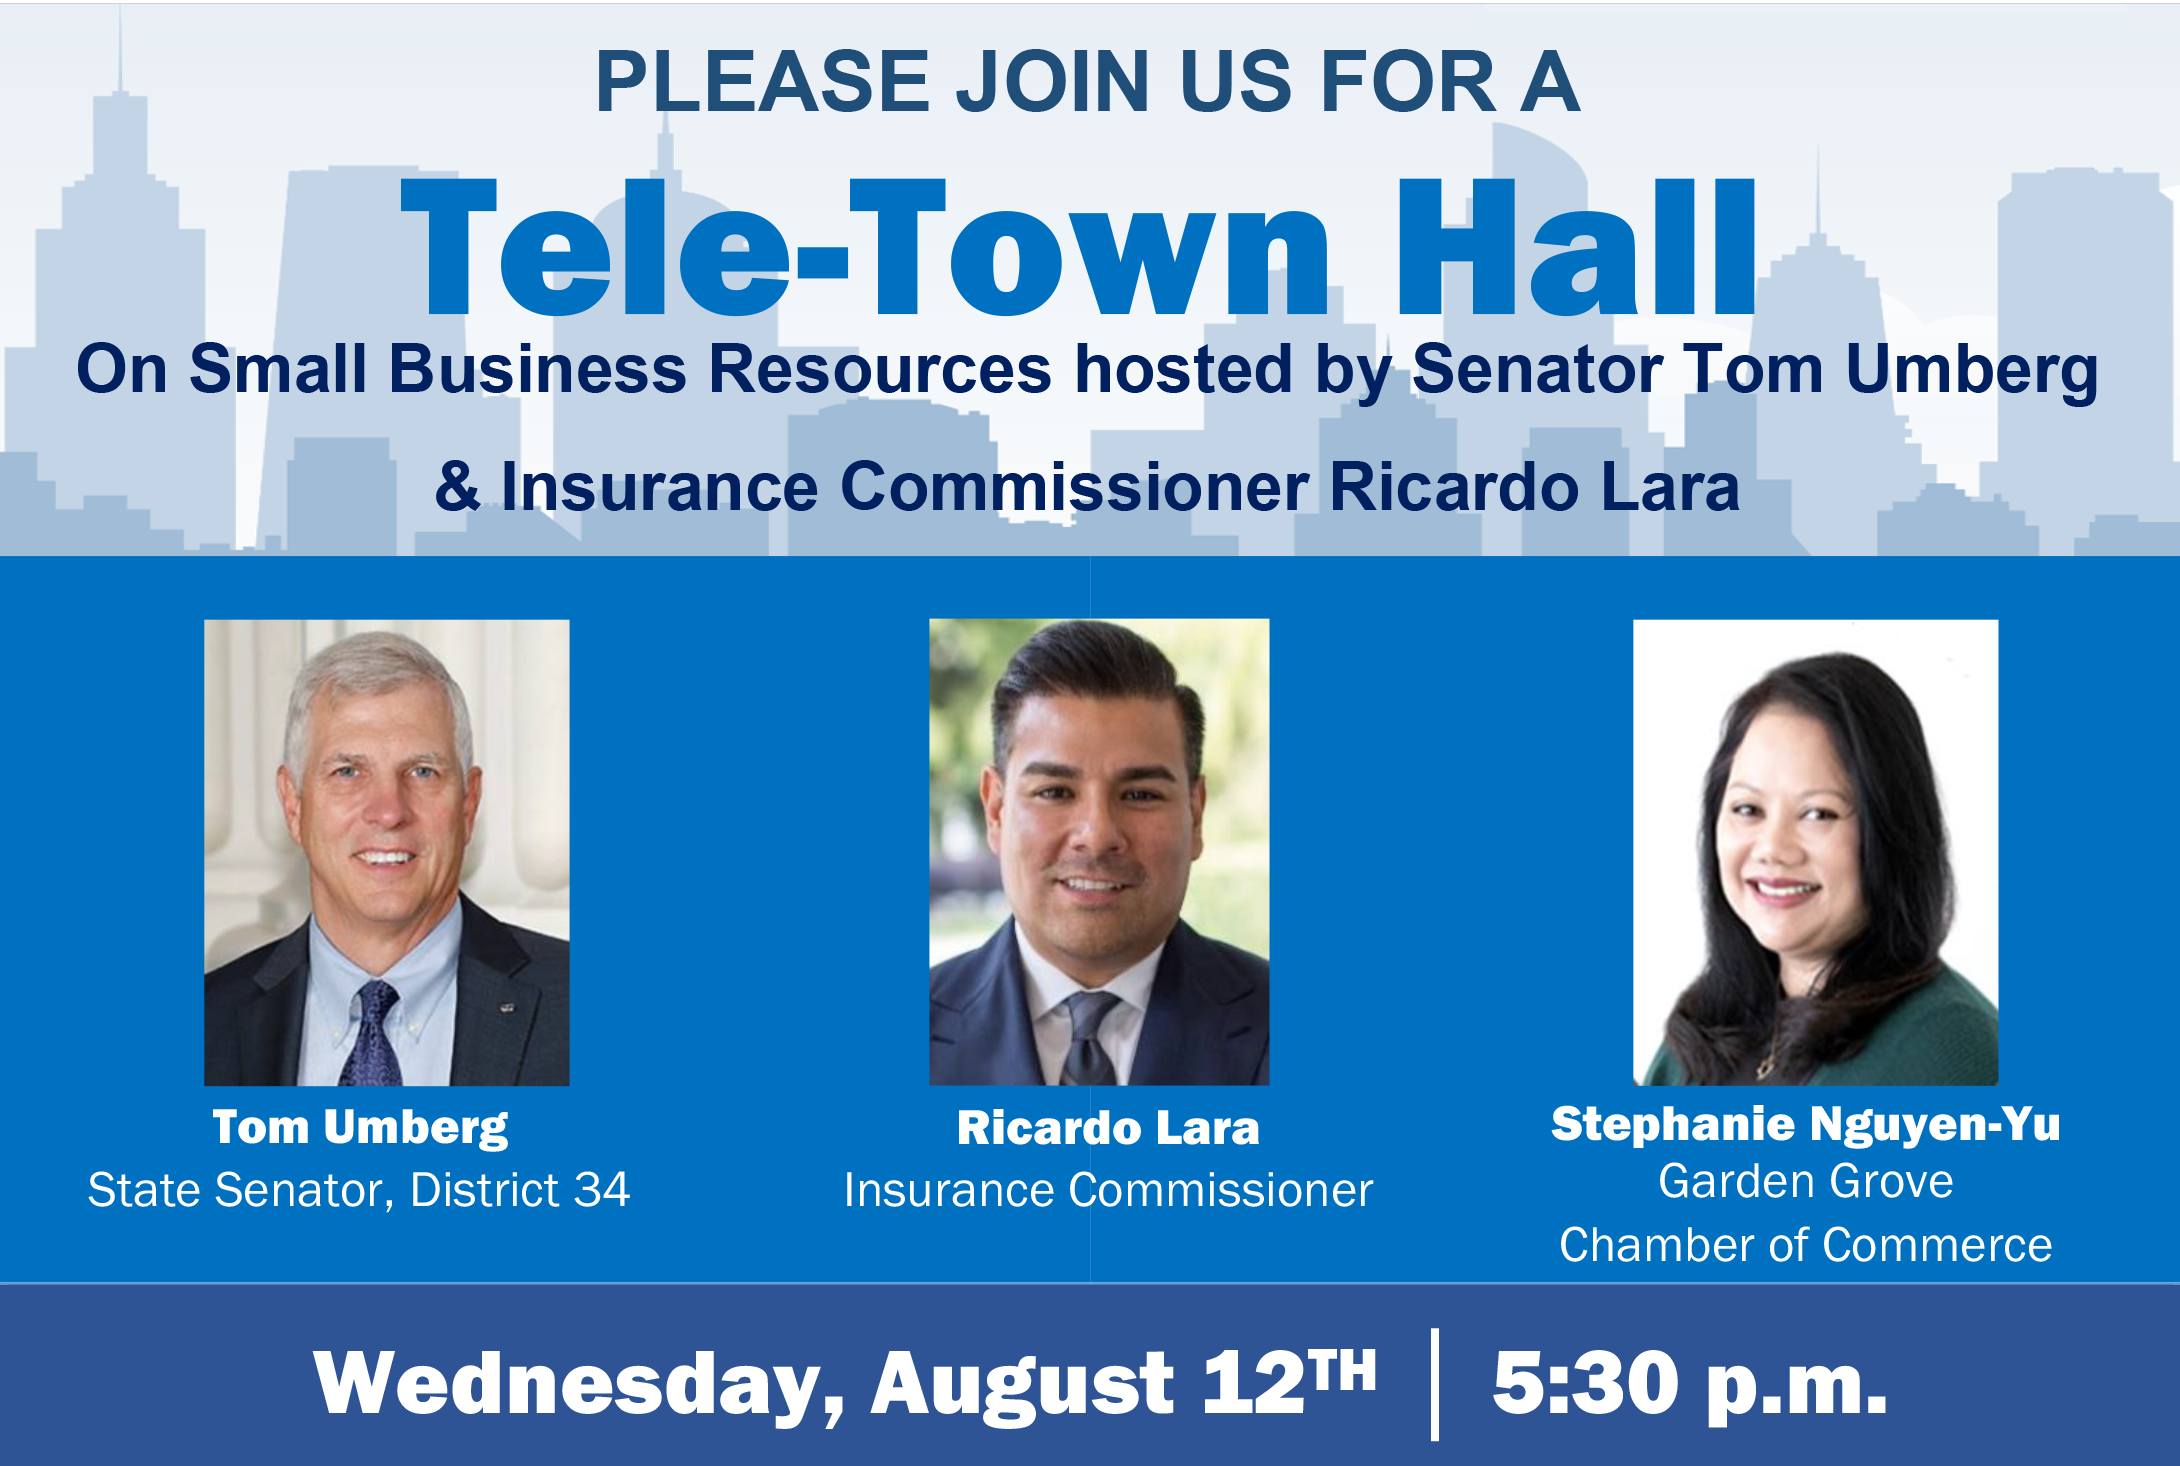 Please join Senator Umber, Stephanie Nguyen-Yu from the Garden Grove Chamber of Commerce, and CA Insurance Commissioner Ricardo Lara for a tele-town hall on
Wednesday, August 12th 5:30 p.m. to 6:30 p.m. 